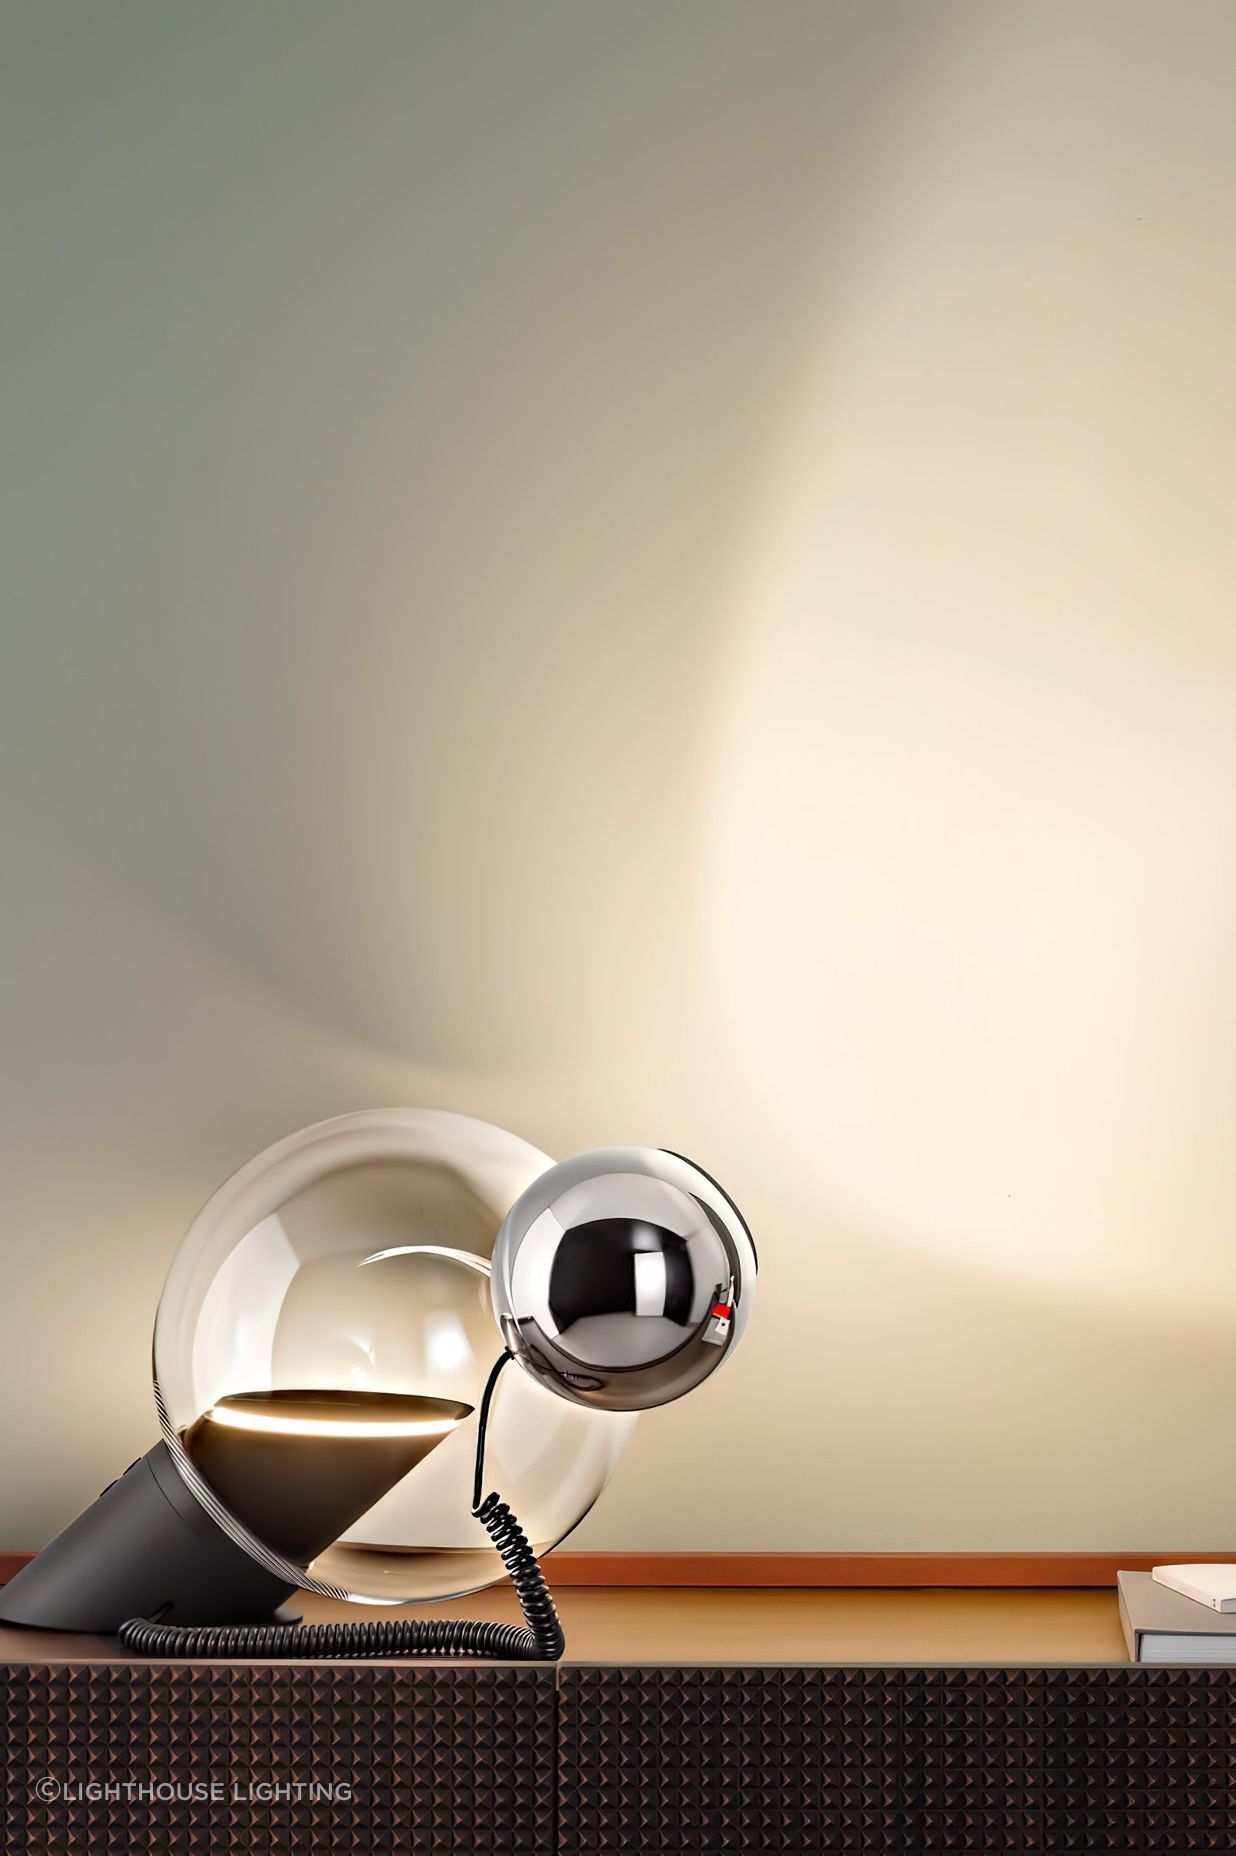 The iconic Gravita 1969 Table Lamp that remains a classic after all these years